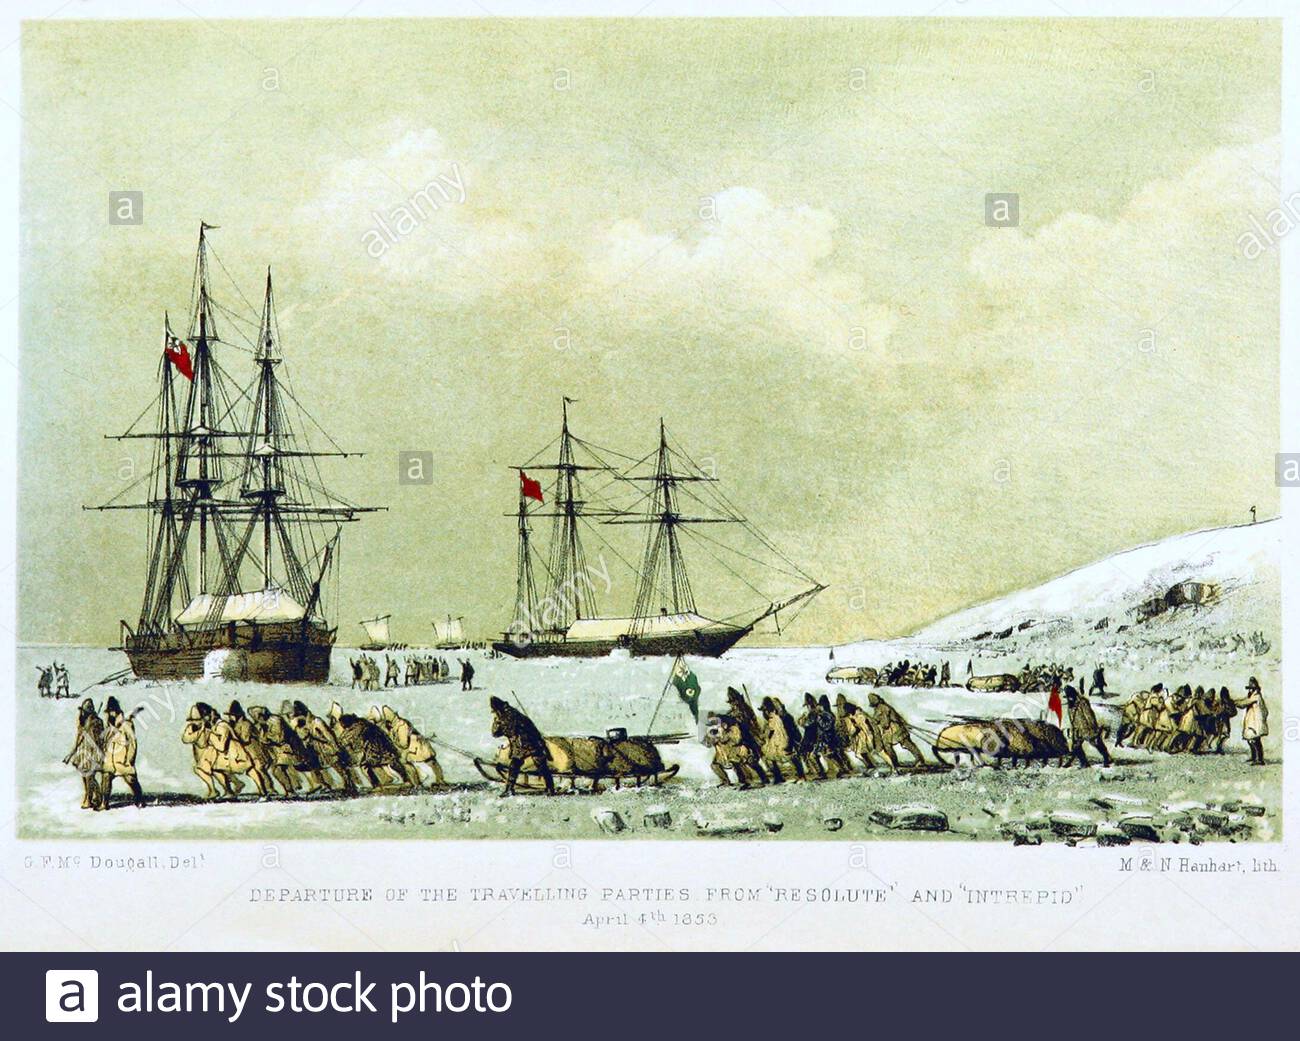 In the search for British Royal Navy officer and Arctic explorer, Captain Sir John Franklin, Departure of the travelling parties from HMS Resolute and HMS Intrepid, vintage illustration from 1857 Stock Photo